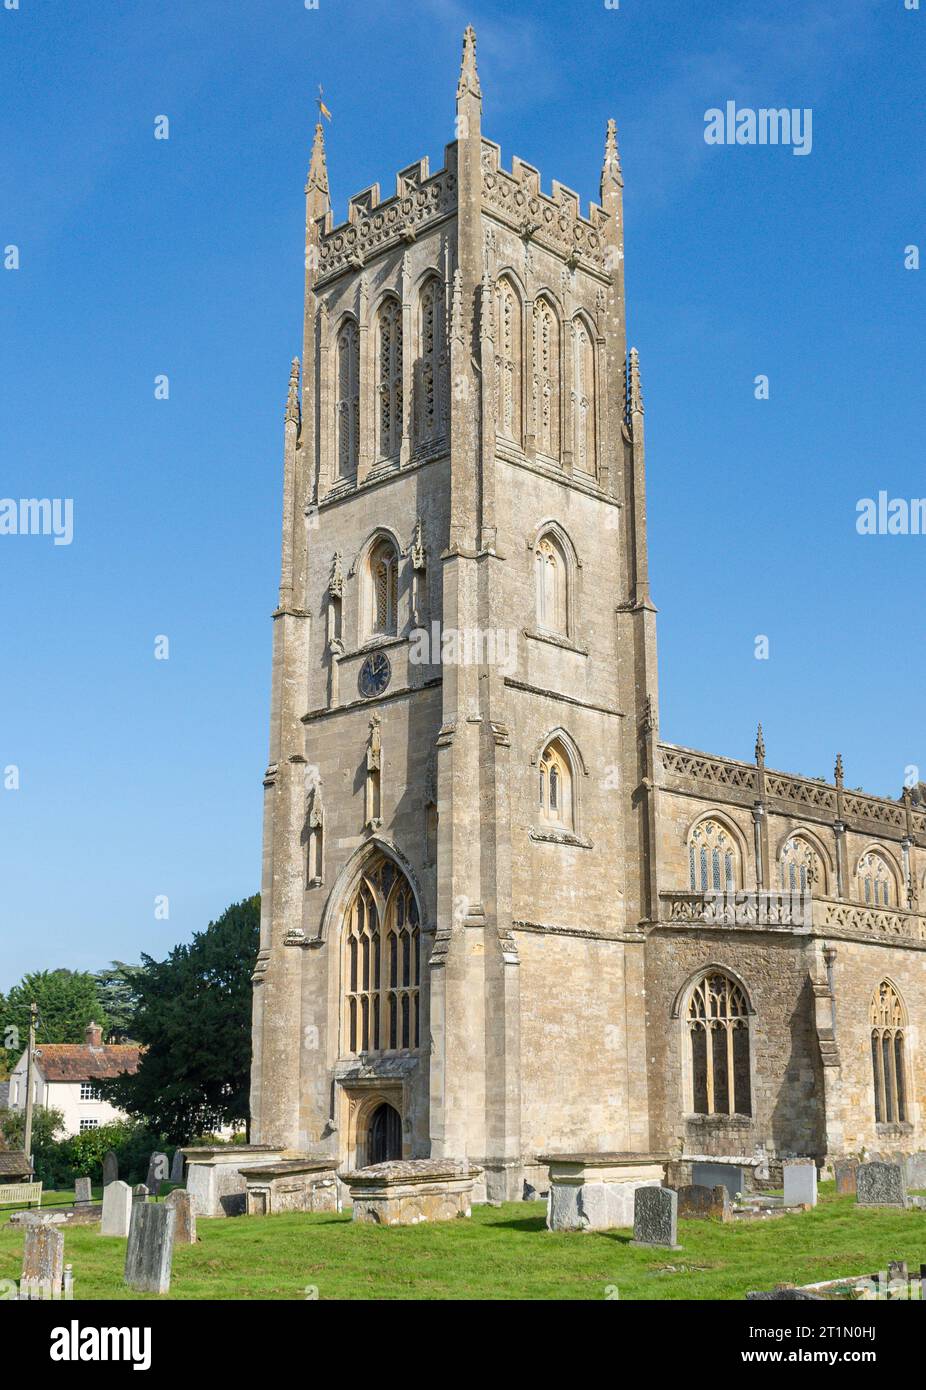 St Mary's Church, Silver Street, Bruton , Somerset, Angleterre, Royaume-Uni Banque D'Images